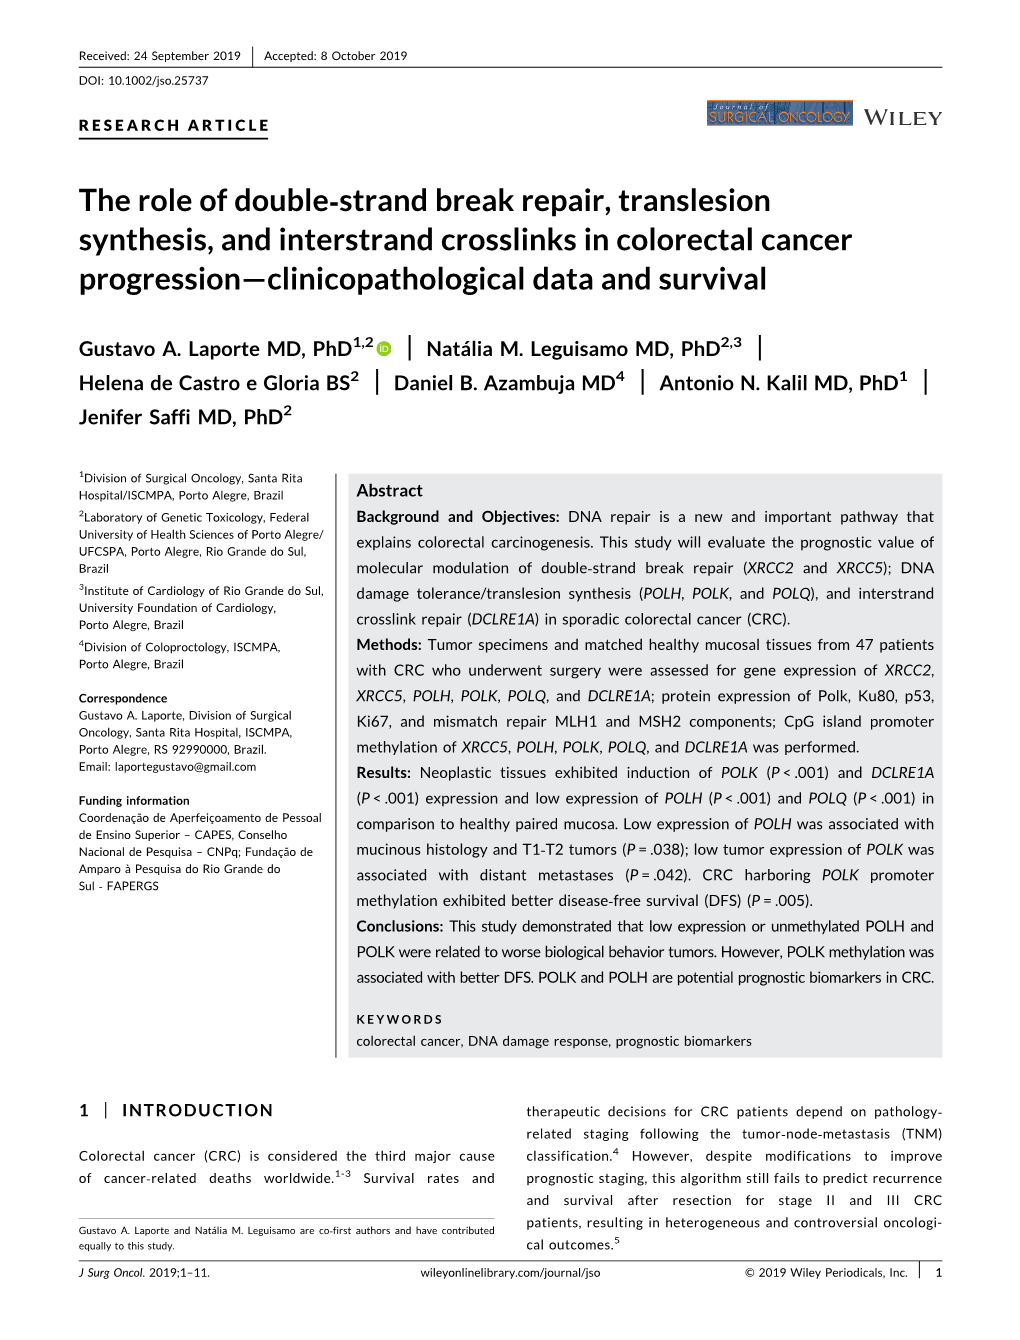 The Role of Double‐Strand Break Repair, Translesion Synthesis, and Interstrand Crosslinks in Colorectal Cancer Progression—Clinicopathological Data and Survival